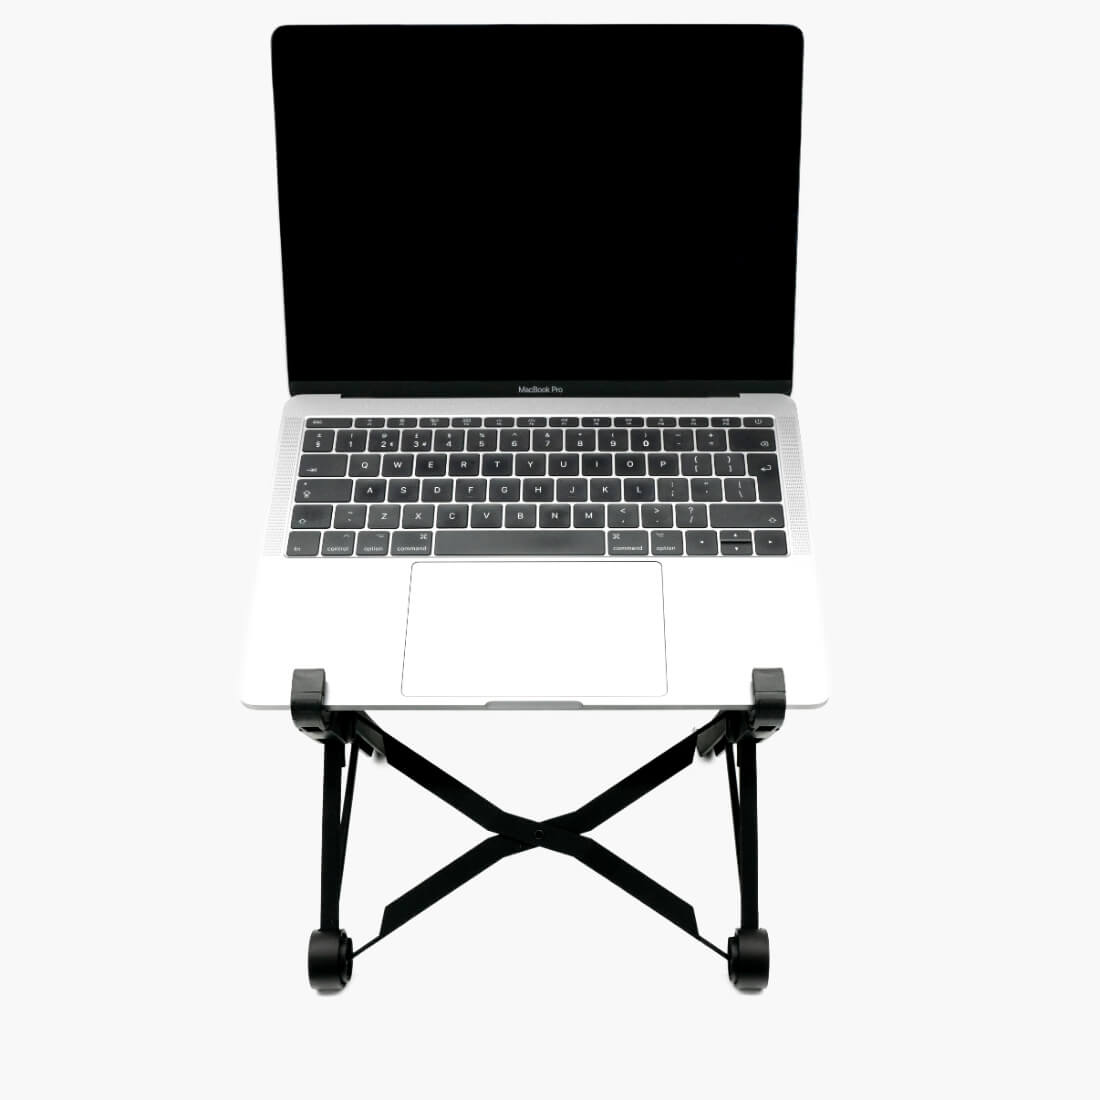 Nexstand K2 Laptop Stand Supports Most Laptops and MacBooks